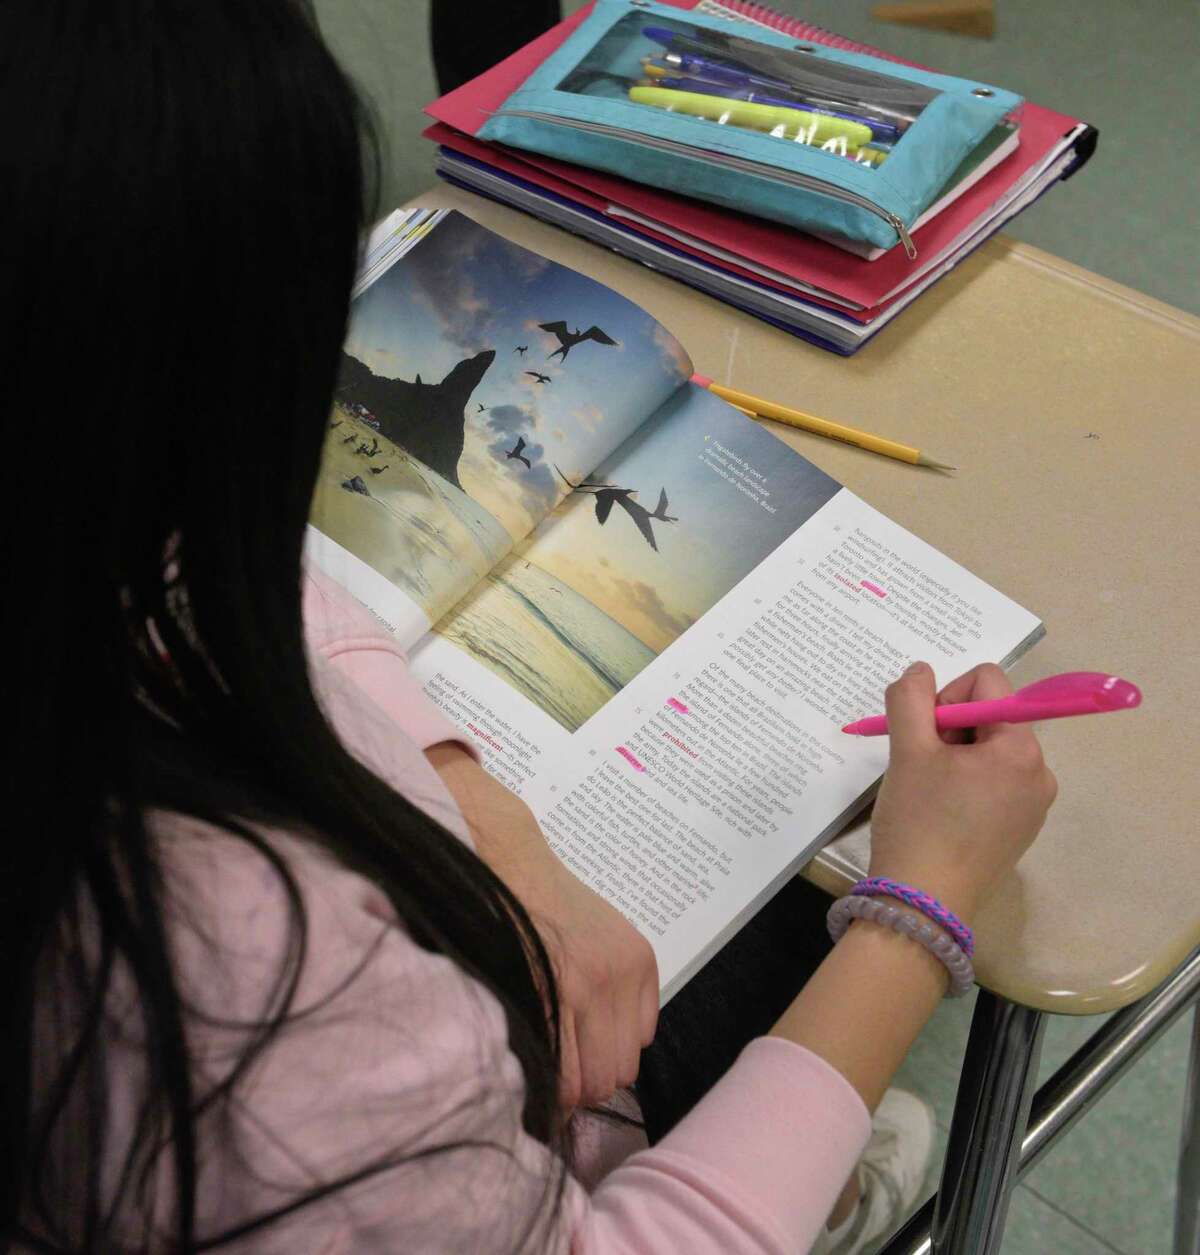 Yelitsa Flores, a senior, works on a reading assignment in her ESL 4 class at New Milford High School, Friday, February 28, 2020, in New Milford, Conn.